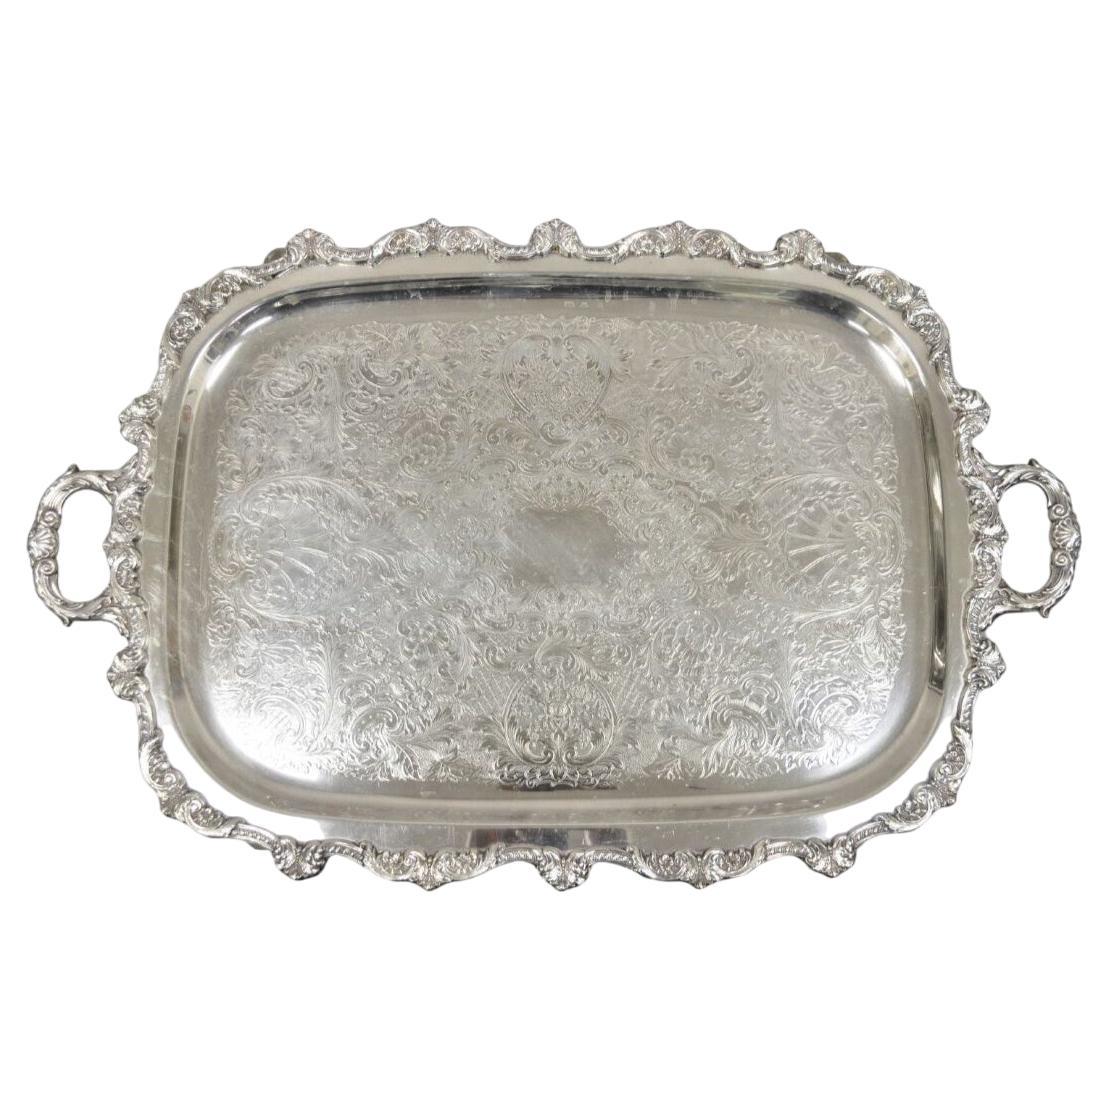 Vintage EPCA Old English by Poole 5032 Silver Plated Ornate Serving Platter Tray